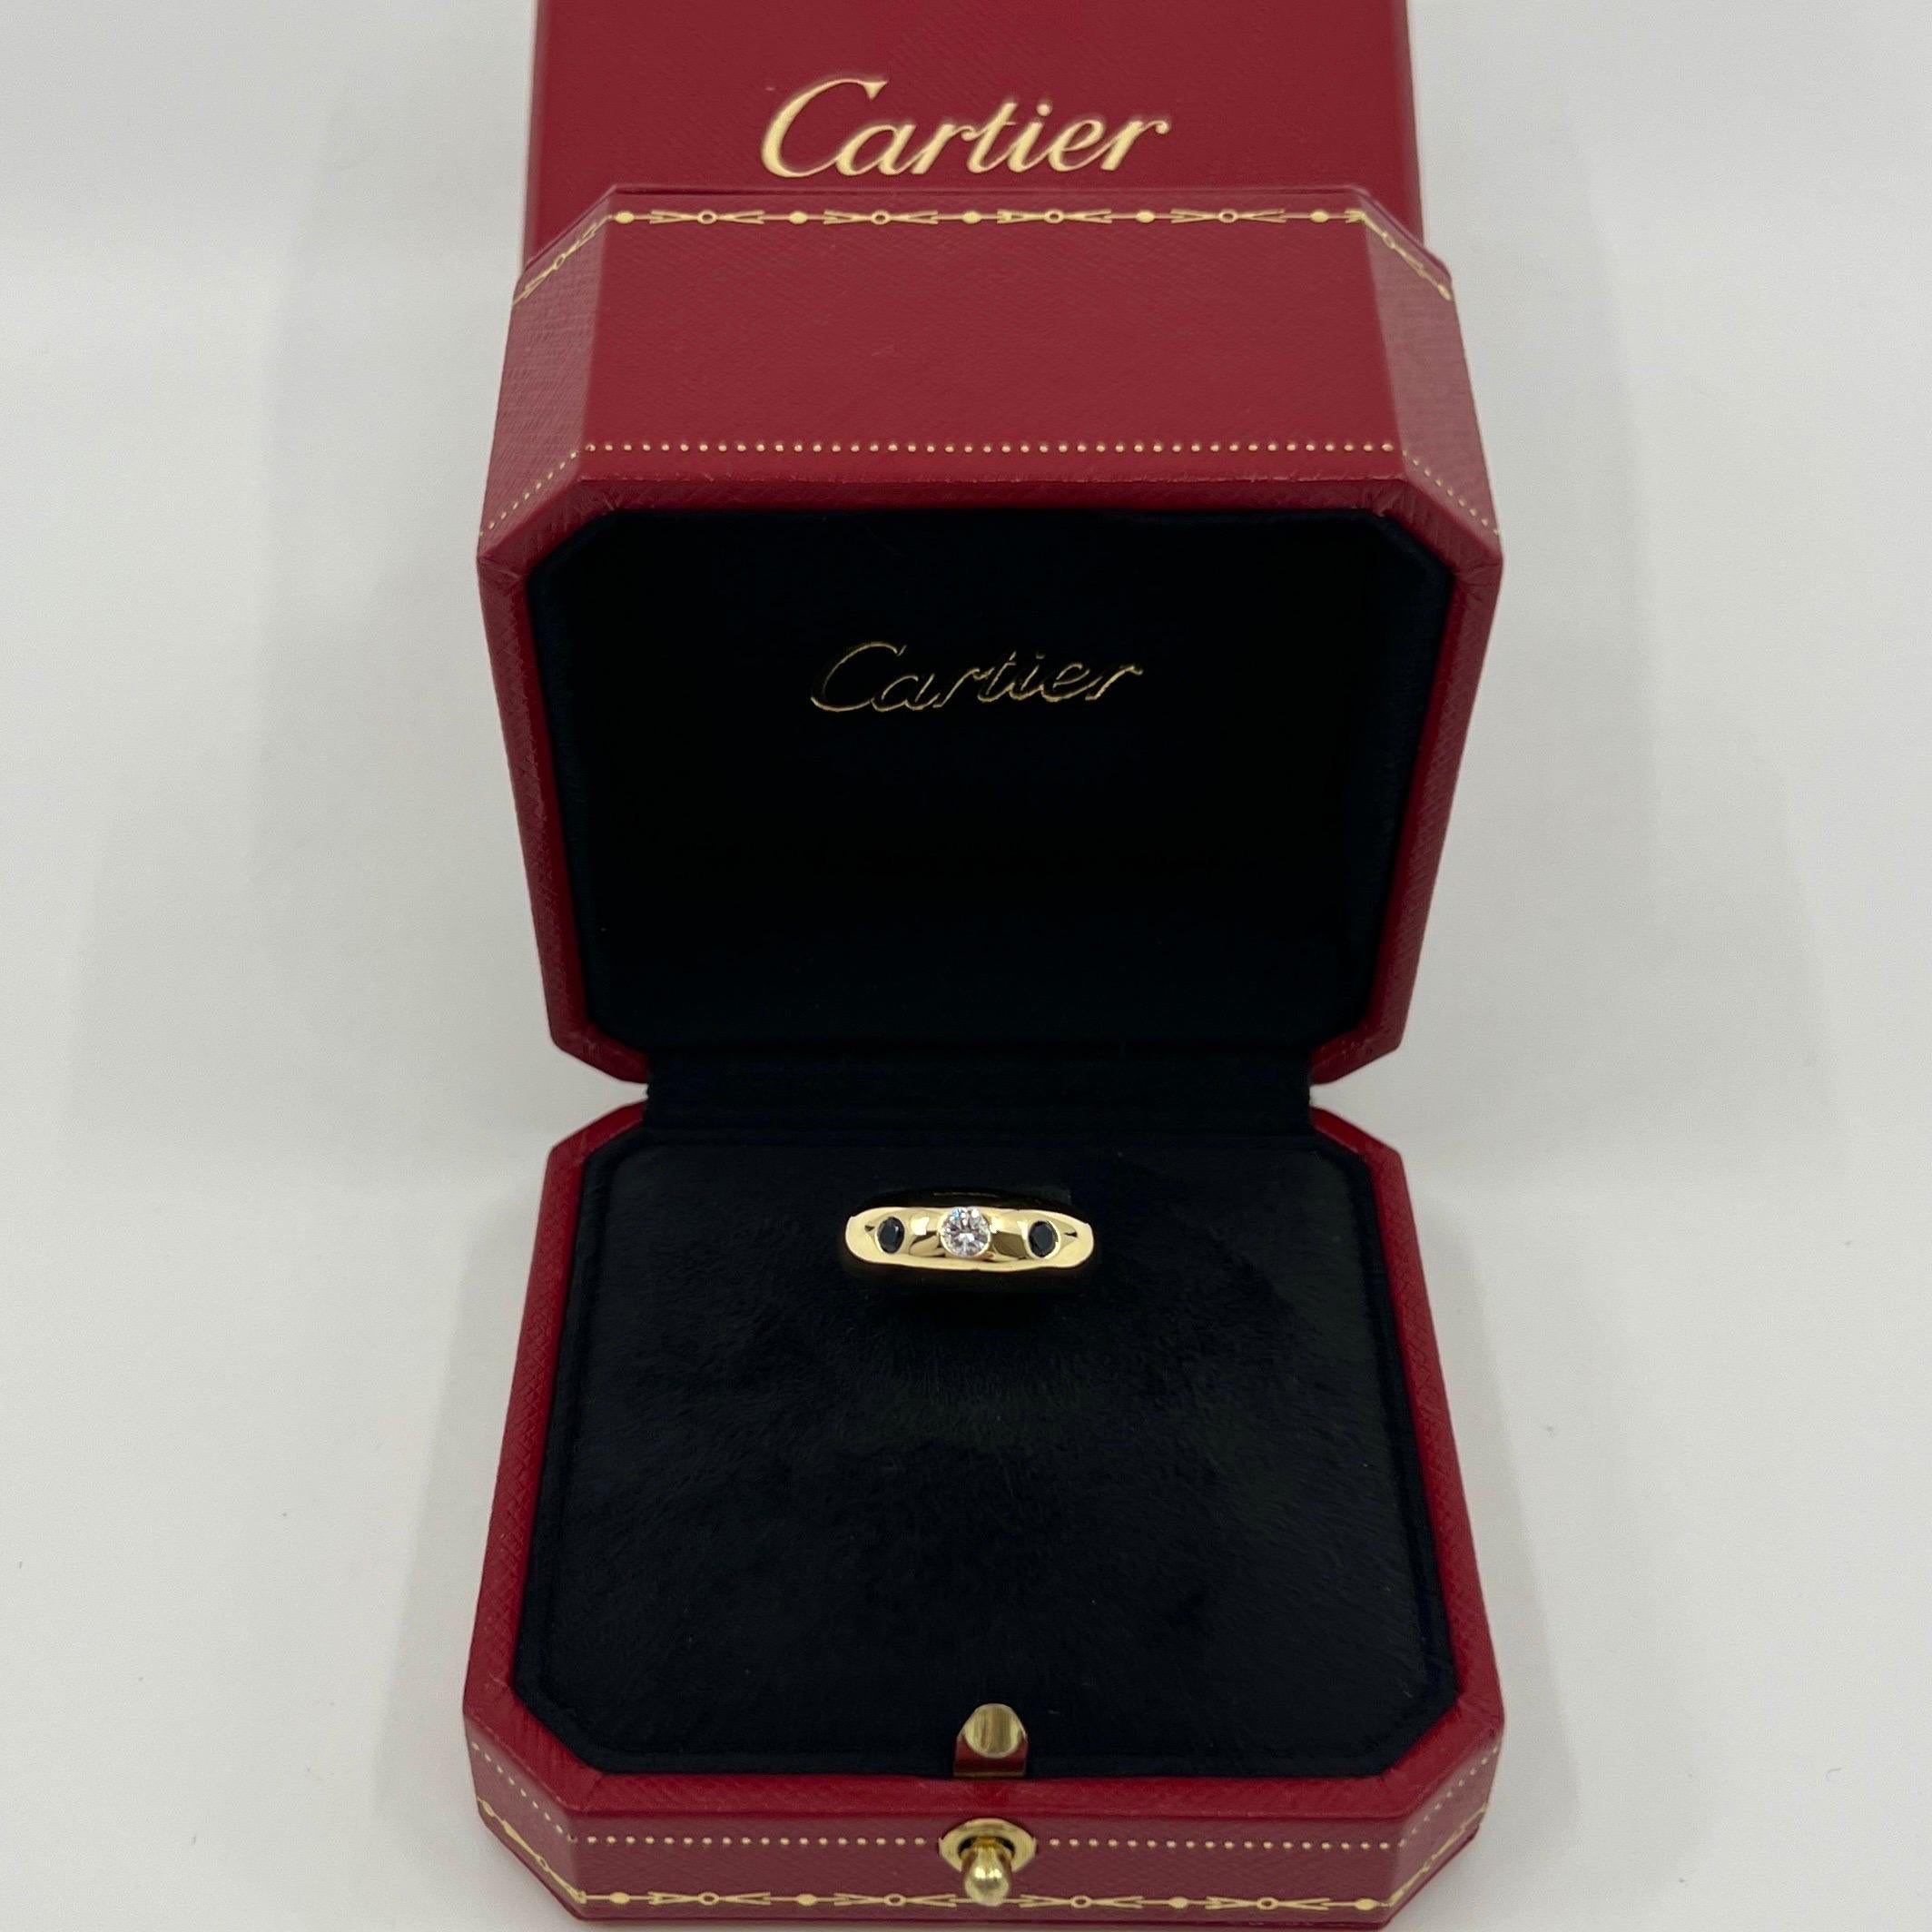 Vintage Cartier Diamond And Blue Sapphire 18k Yellow Gold Three Stone Dome Ring.

Stunning yellow gold Cartier ring set with a beautiful 3.5mm centre diamond with F/G Colour and VVS clarity. This is accented by 2 fine deep blue sapphires approx